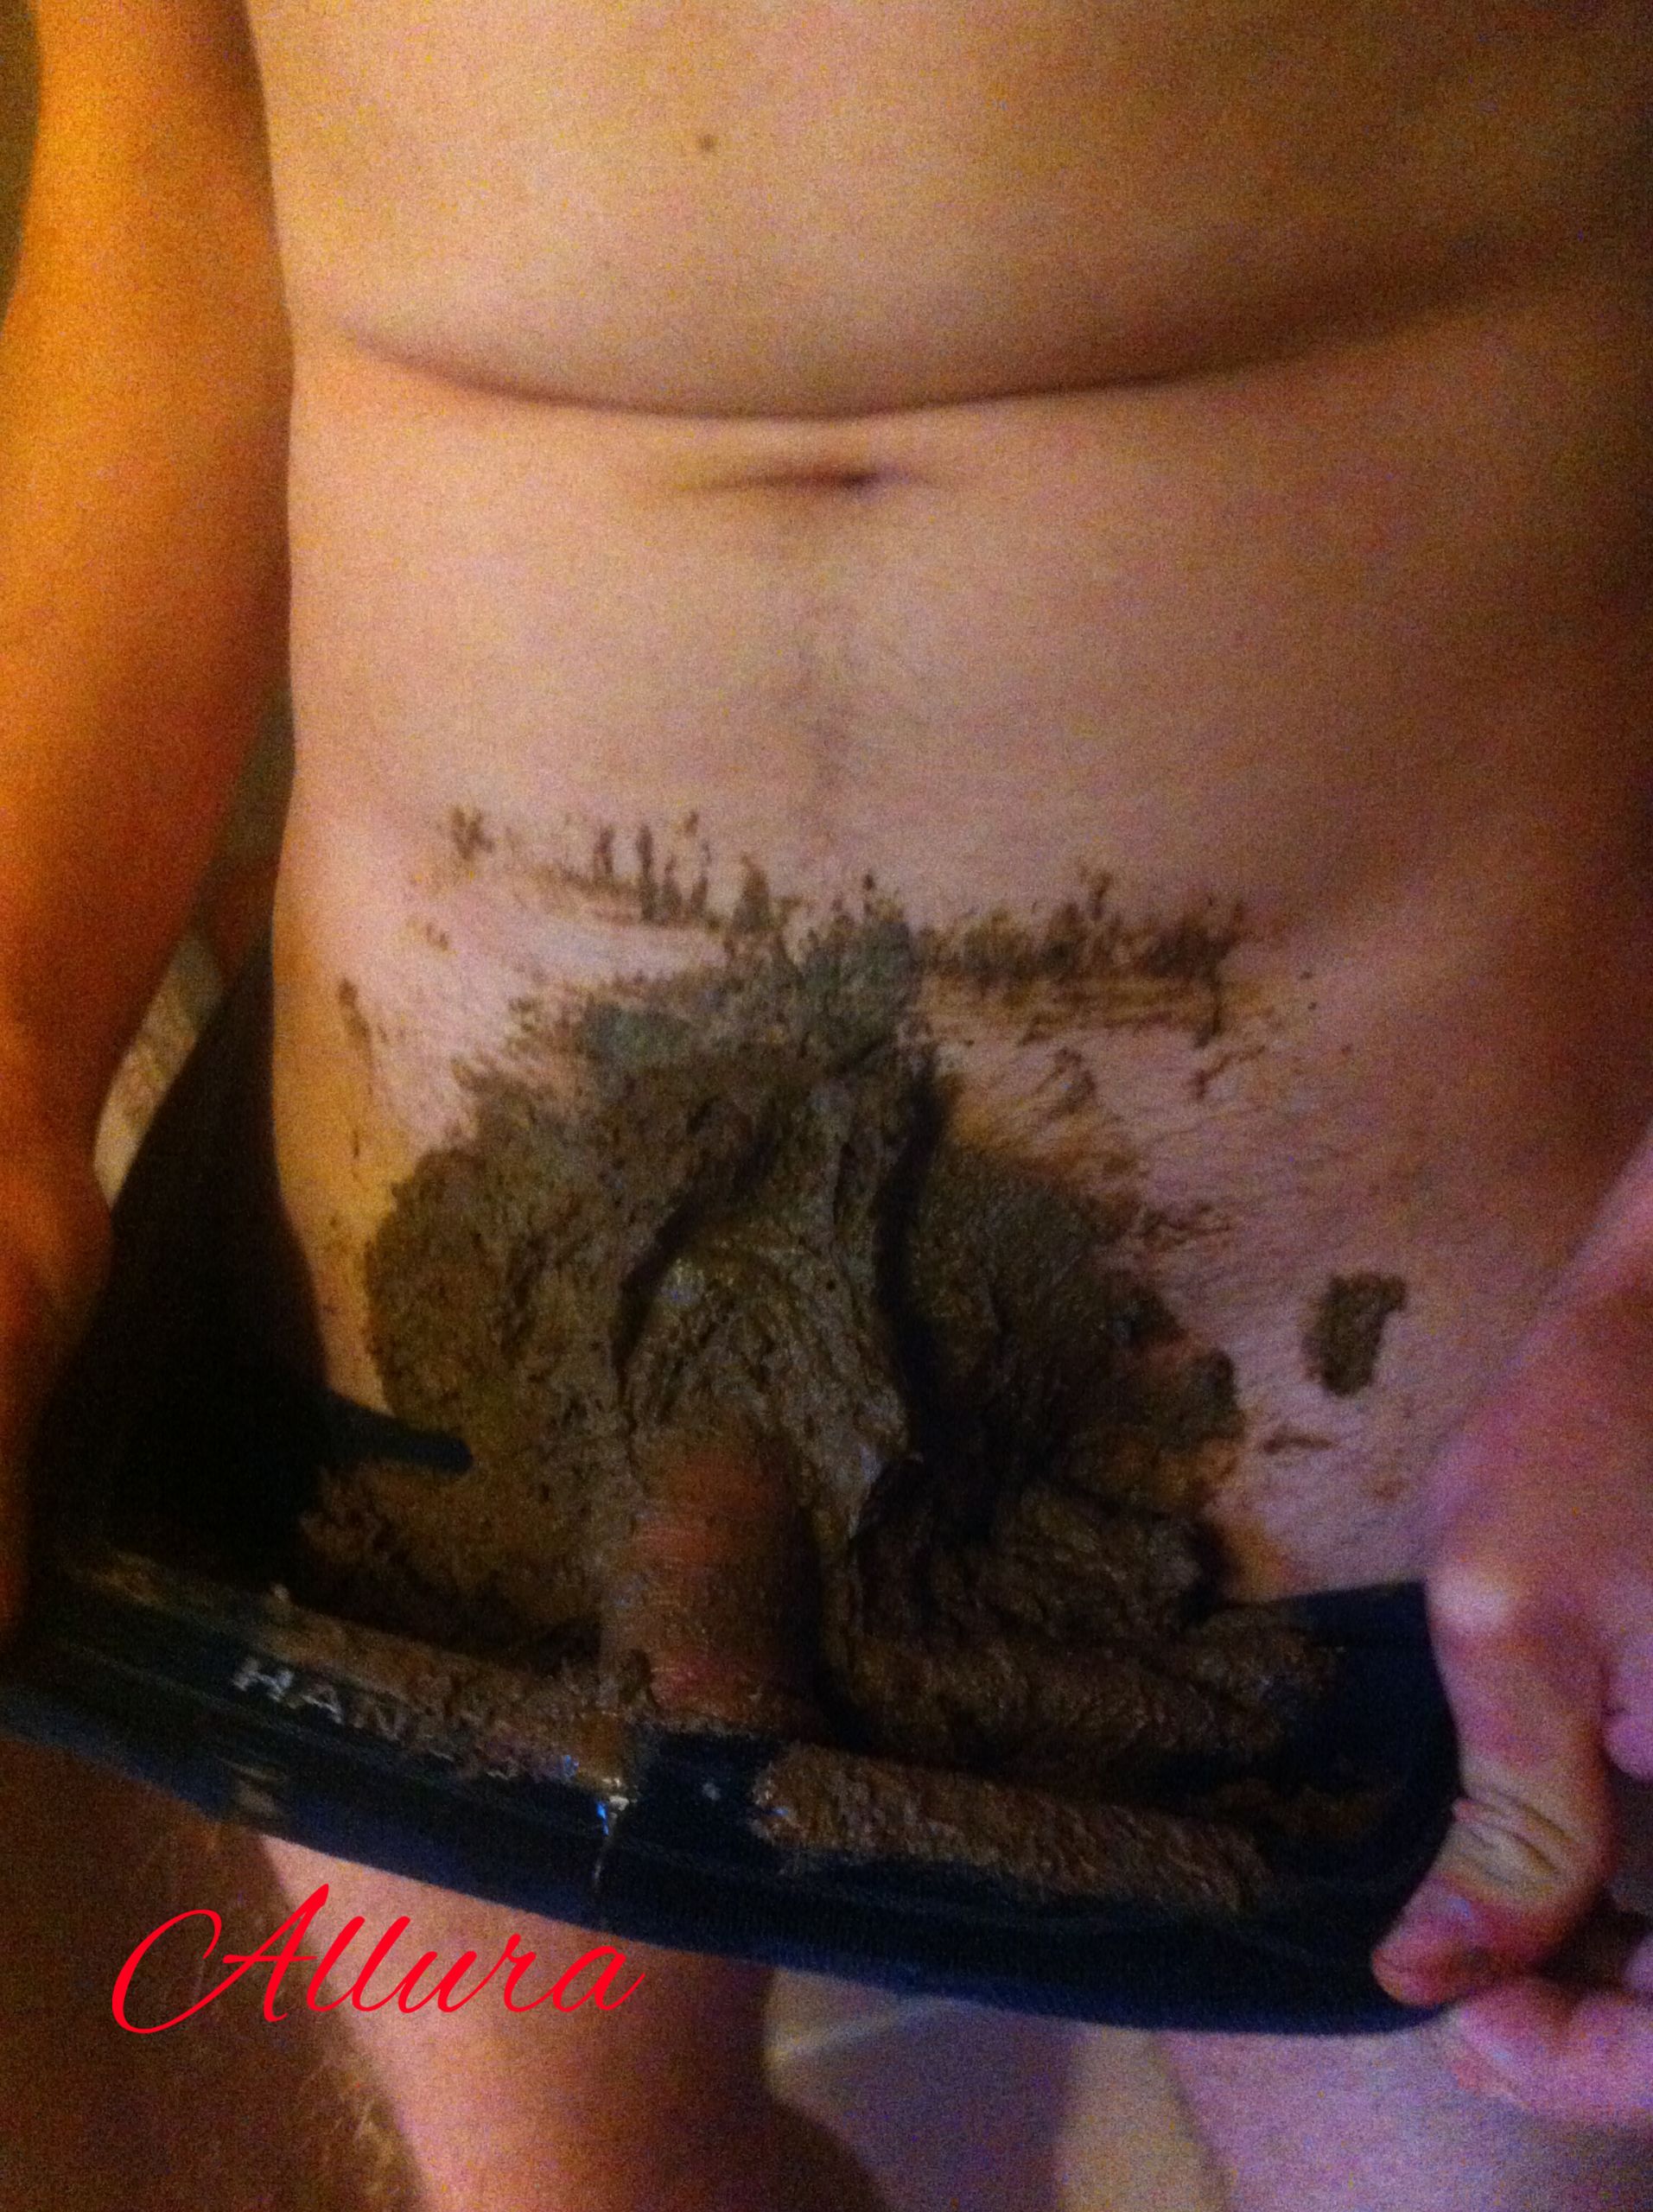 Dirty cock when I am done with him